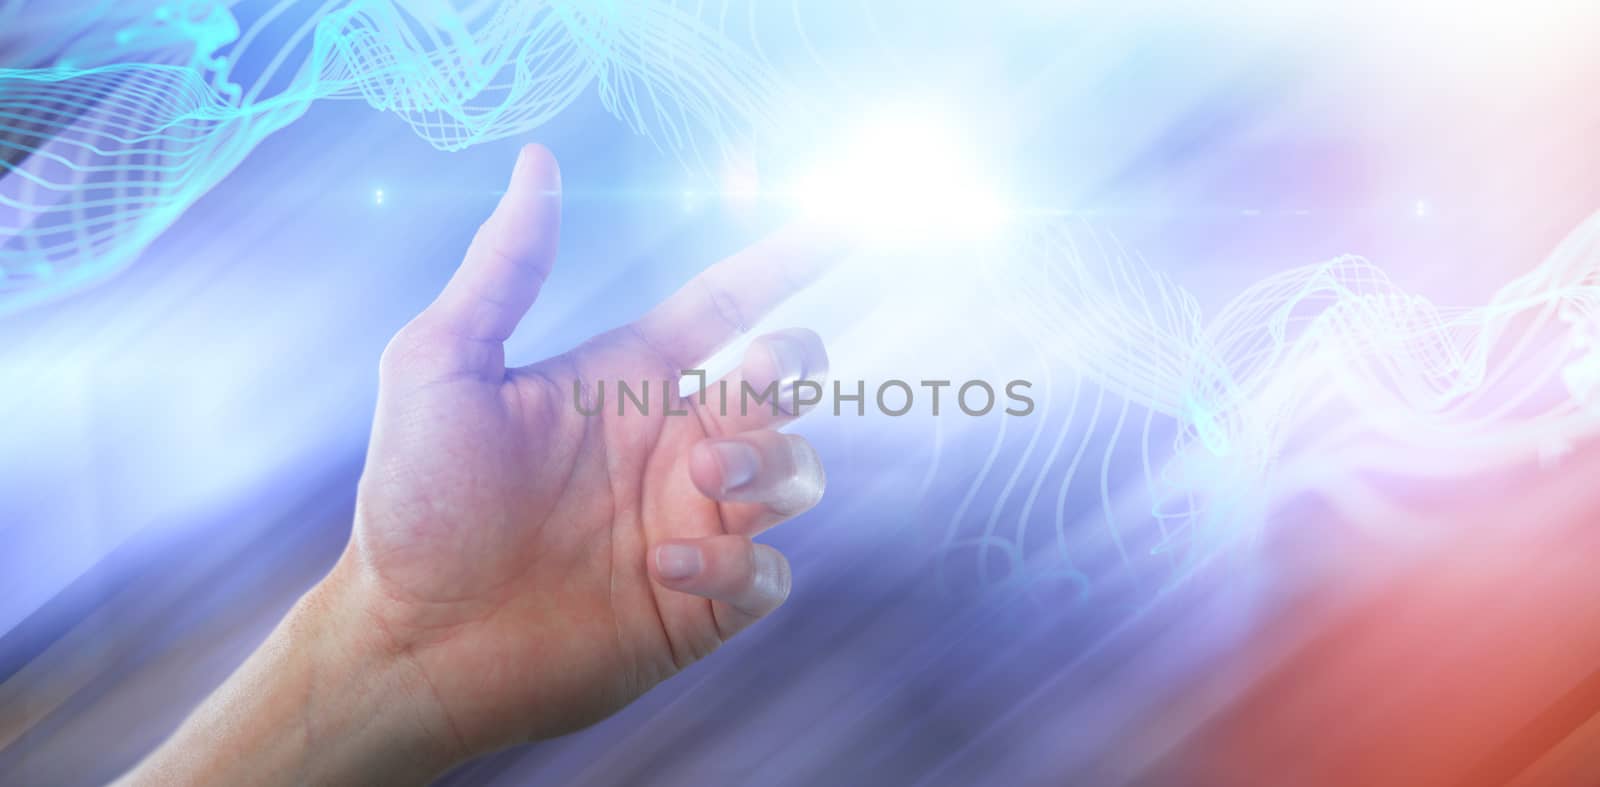 Composite image of hand of man pretending to touch an invisible screen by Wavebreakmedia